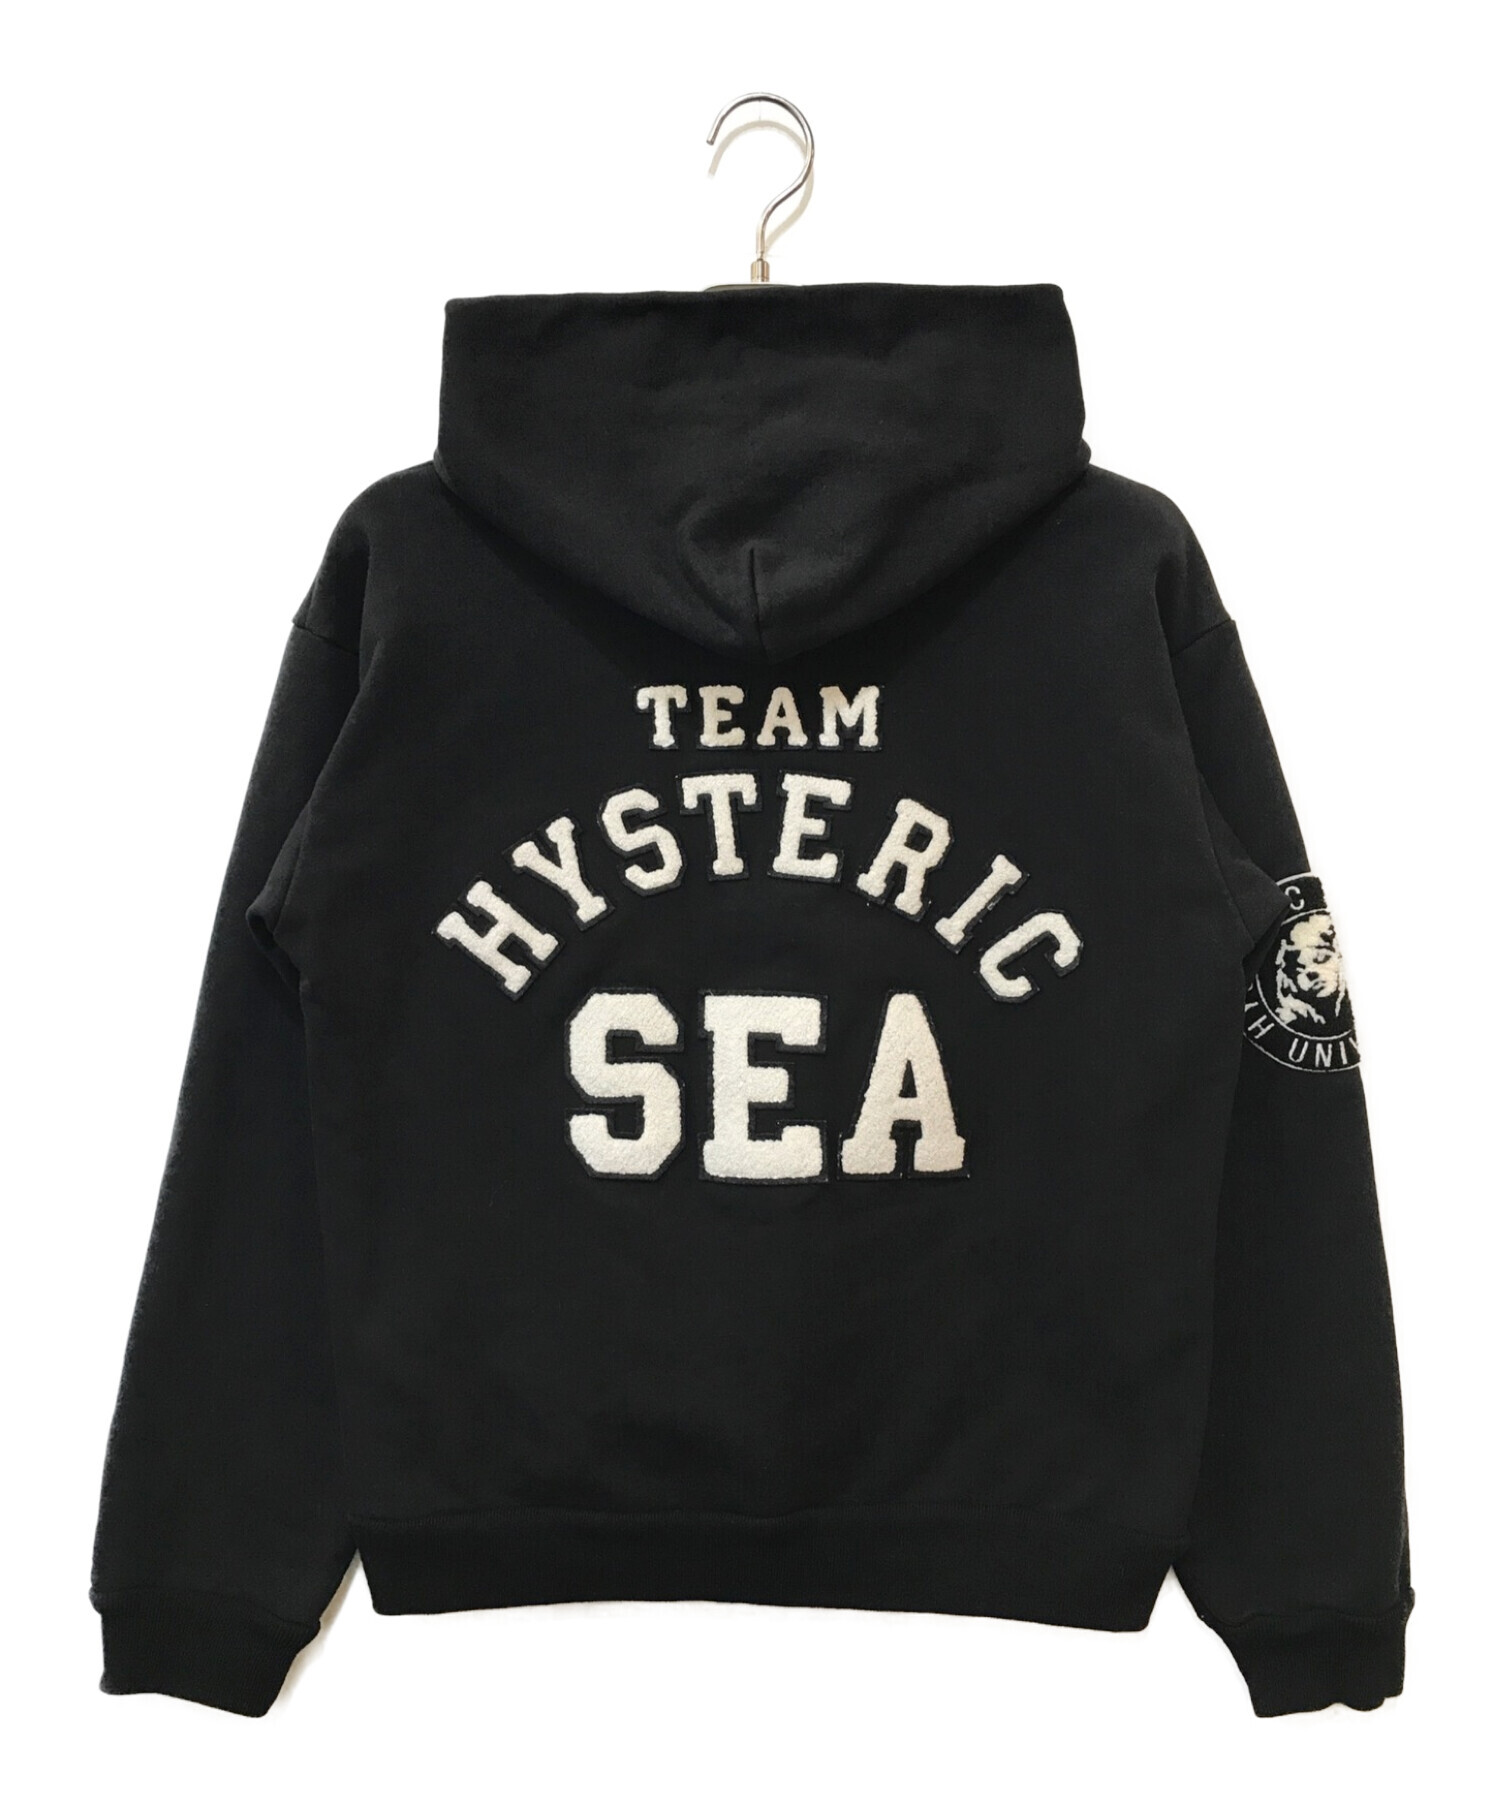 wind and sea hysteric hoody sizeL